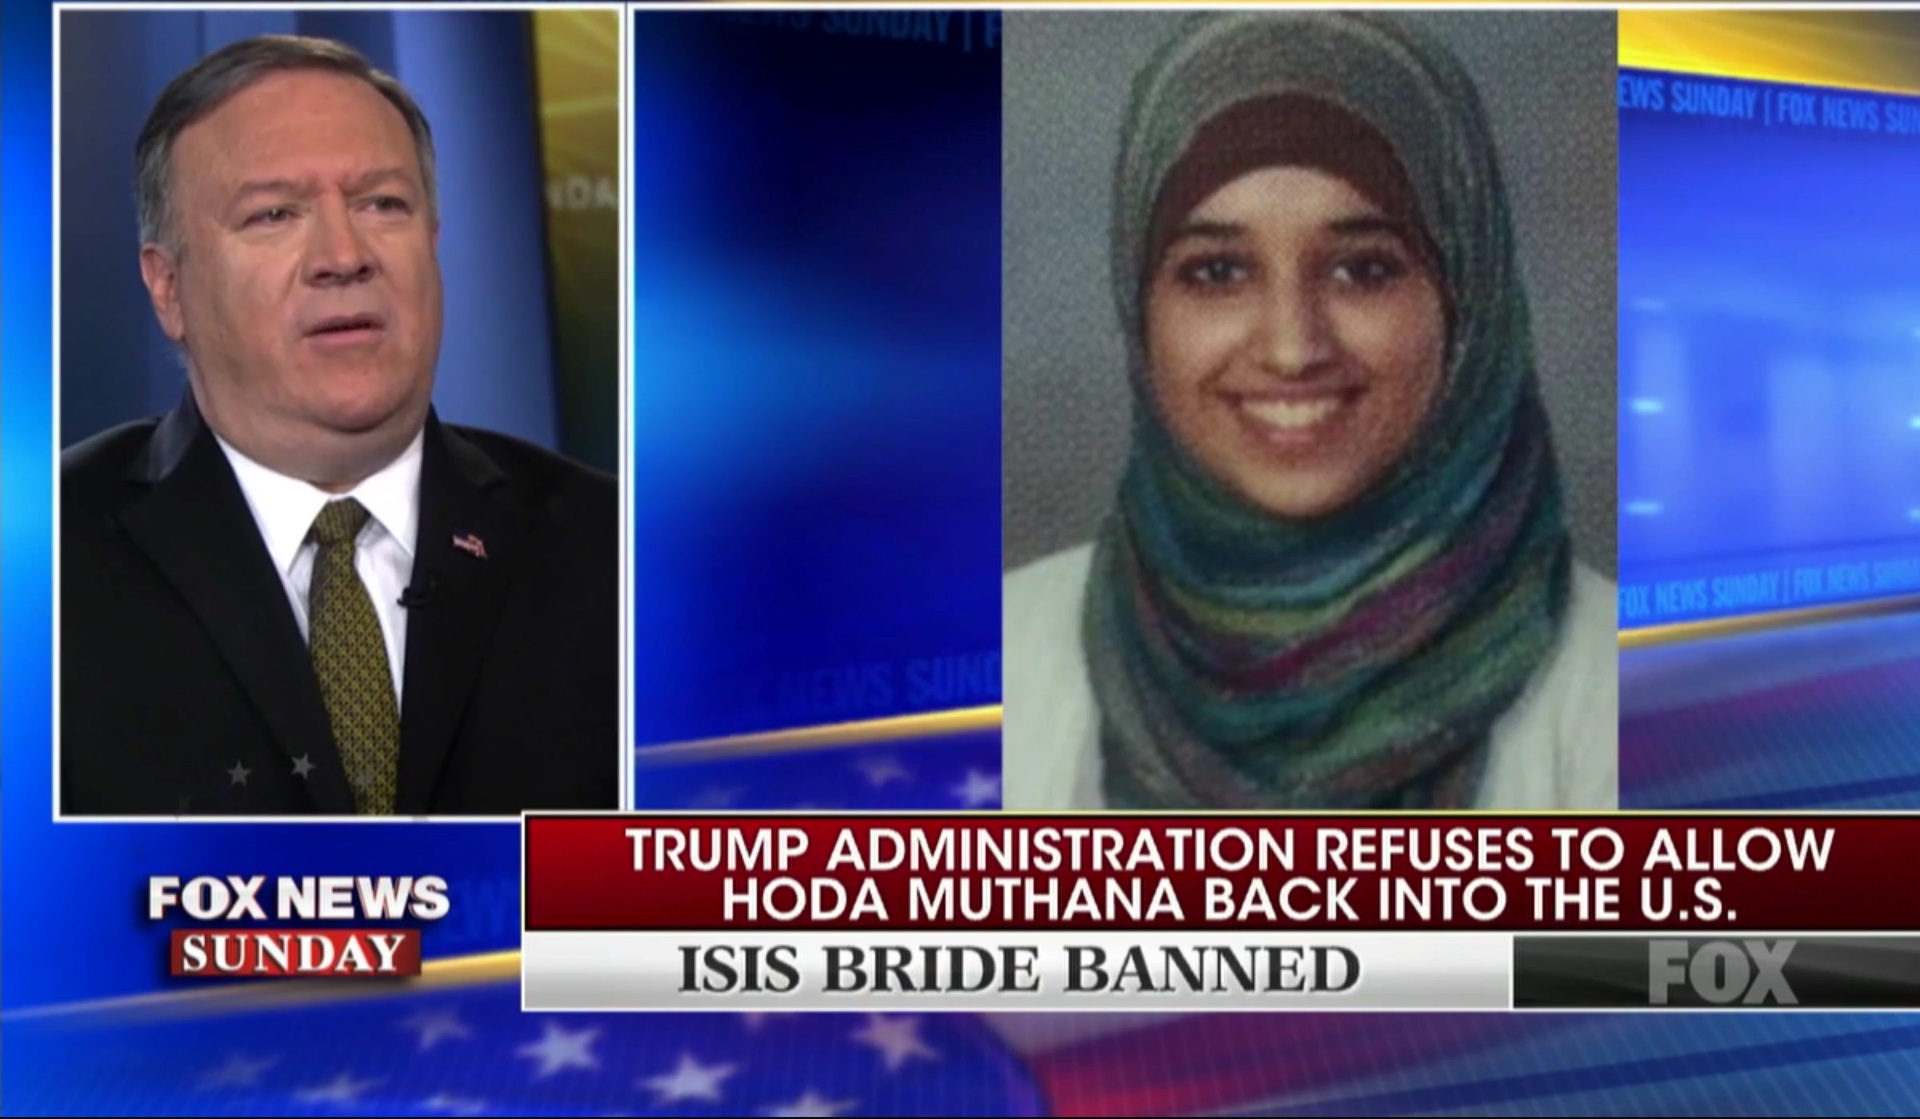 Secretary of State Mike Pompeo appears on “Fox News Sunday” to discuss an ISIS Bride who wants back in the U.S., Feb. 24, 2019. Fox News screenshot.